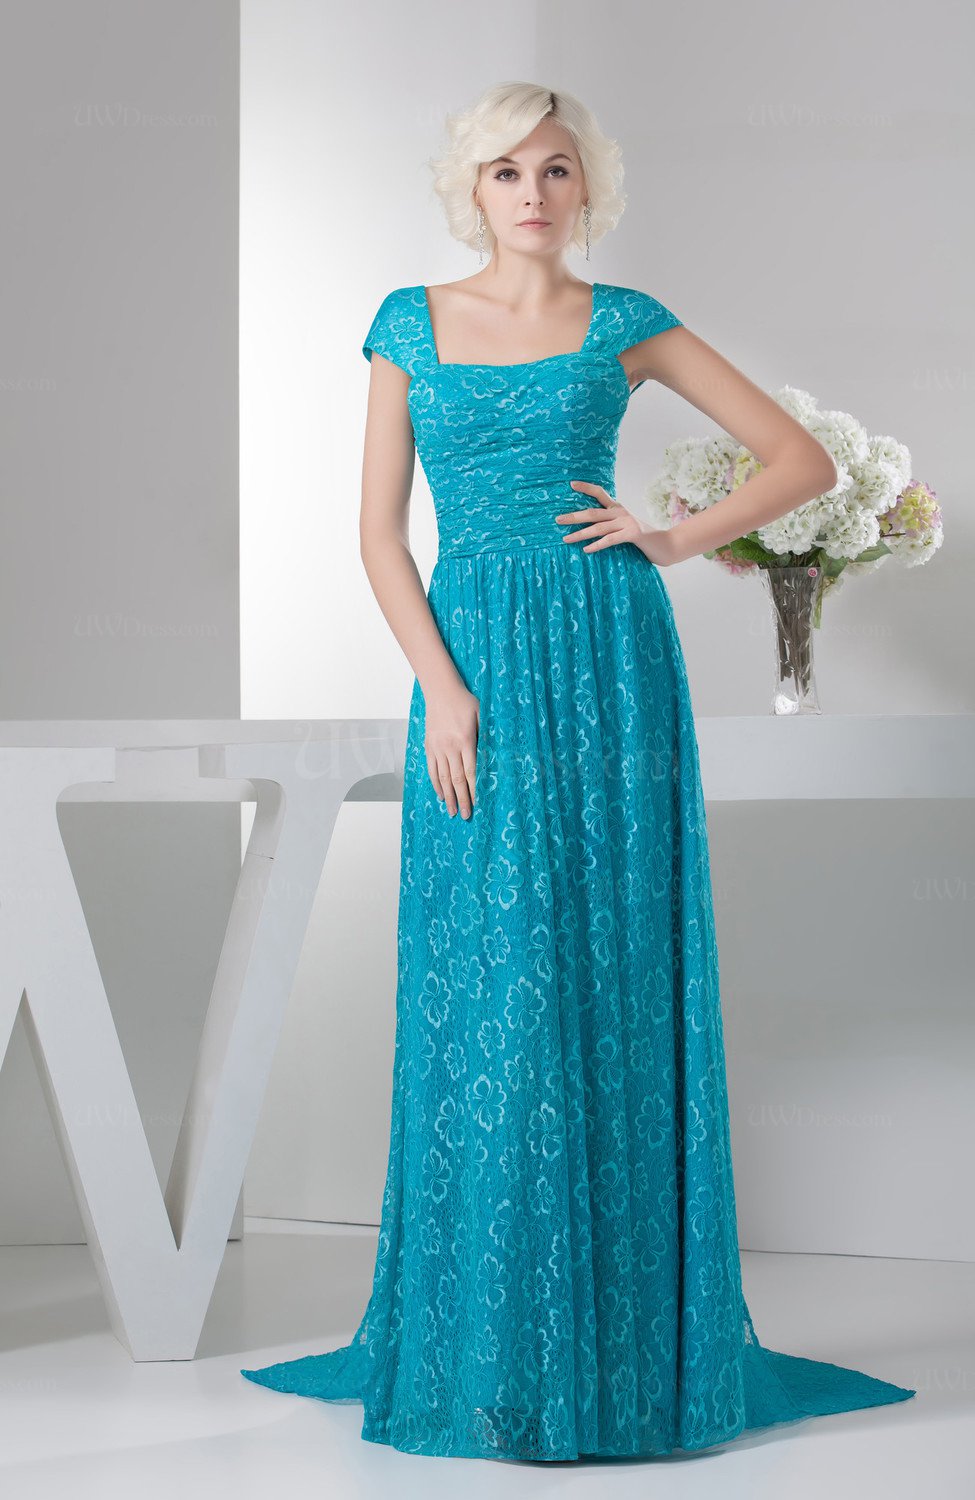 Petite Formal Gowns And Dresses